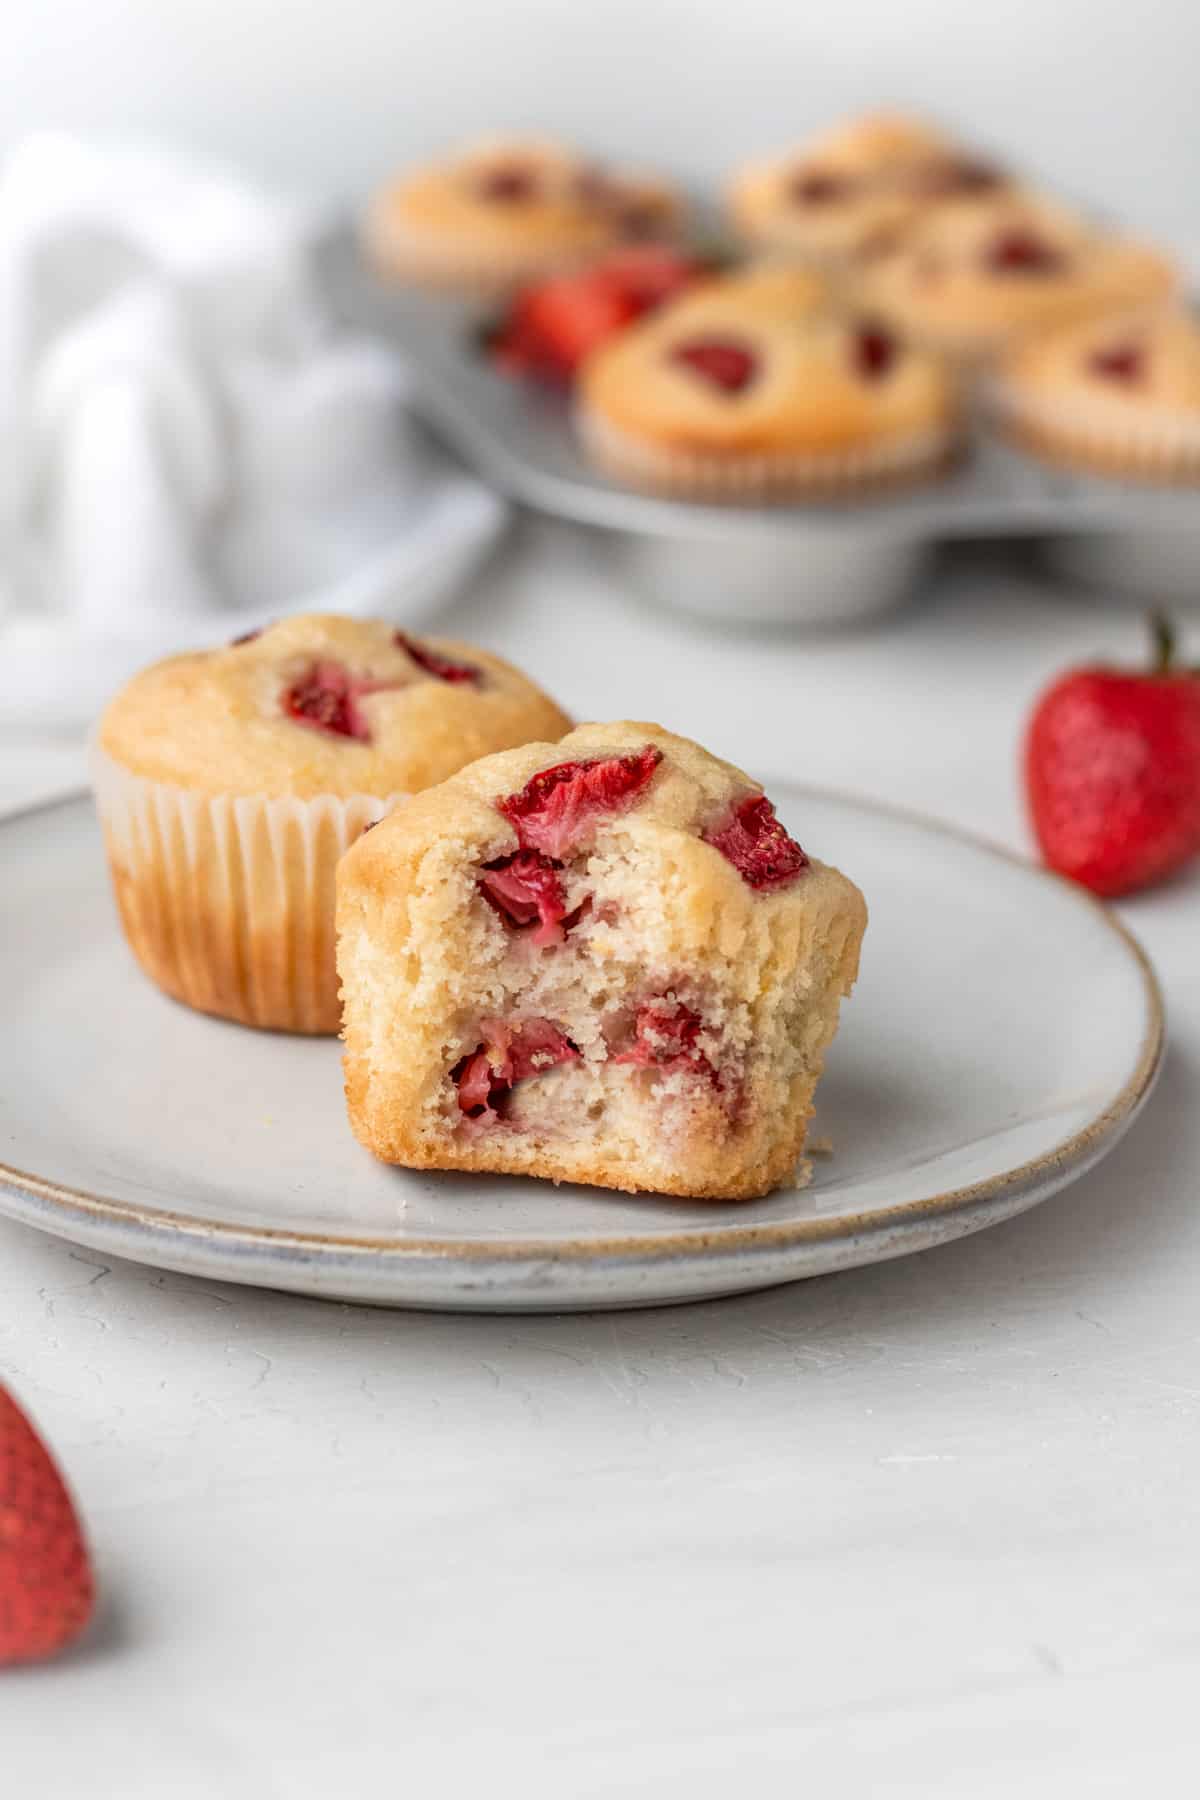 Two vegan strawberry muffins on a plate.